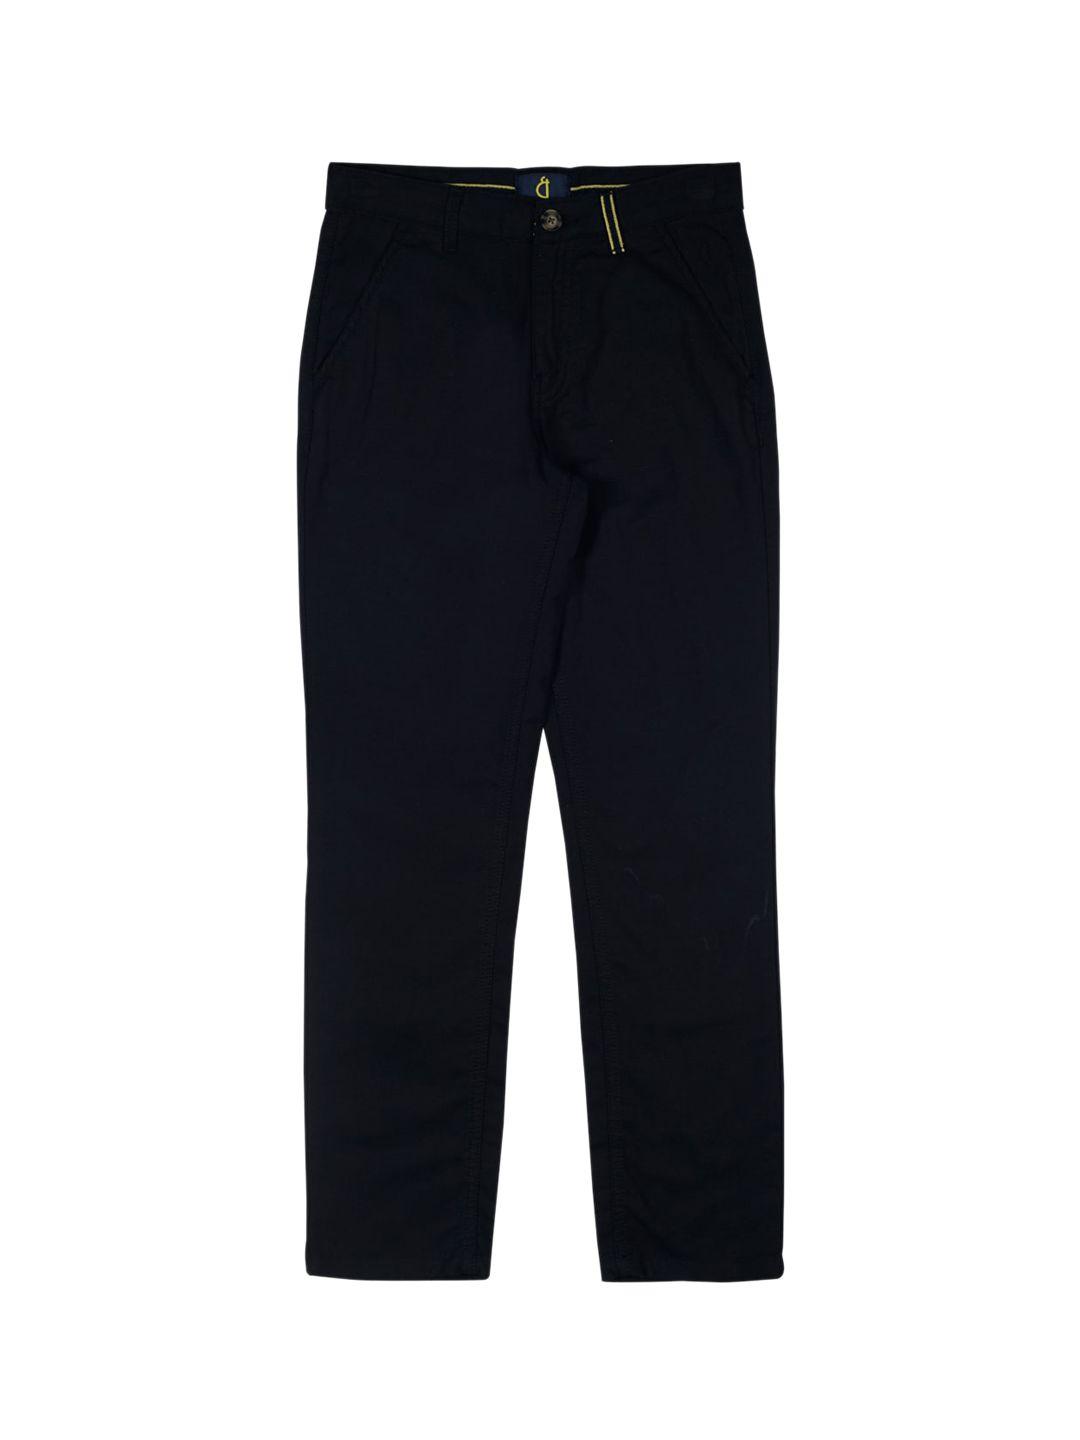 gini-and-jony-boys-solid-trousers